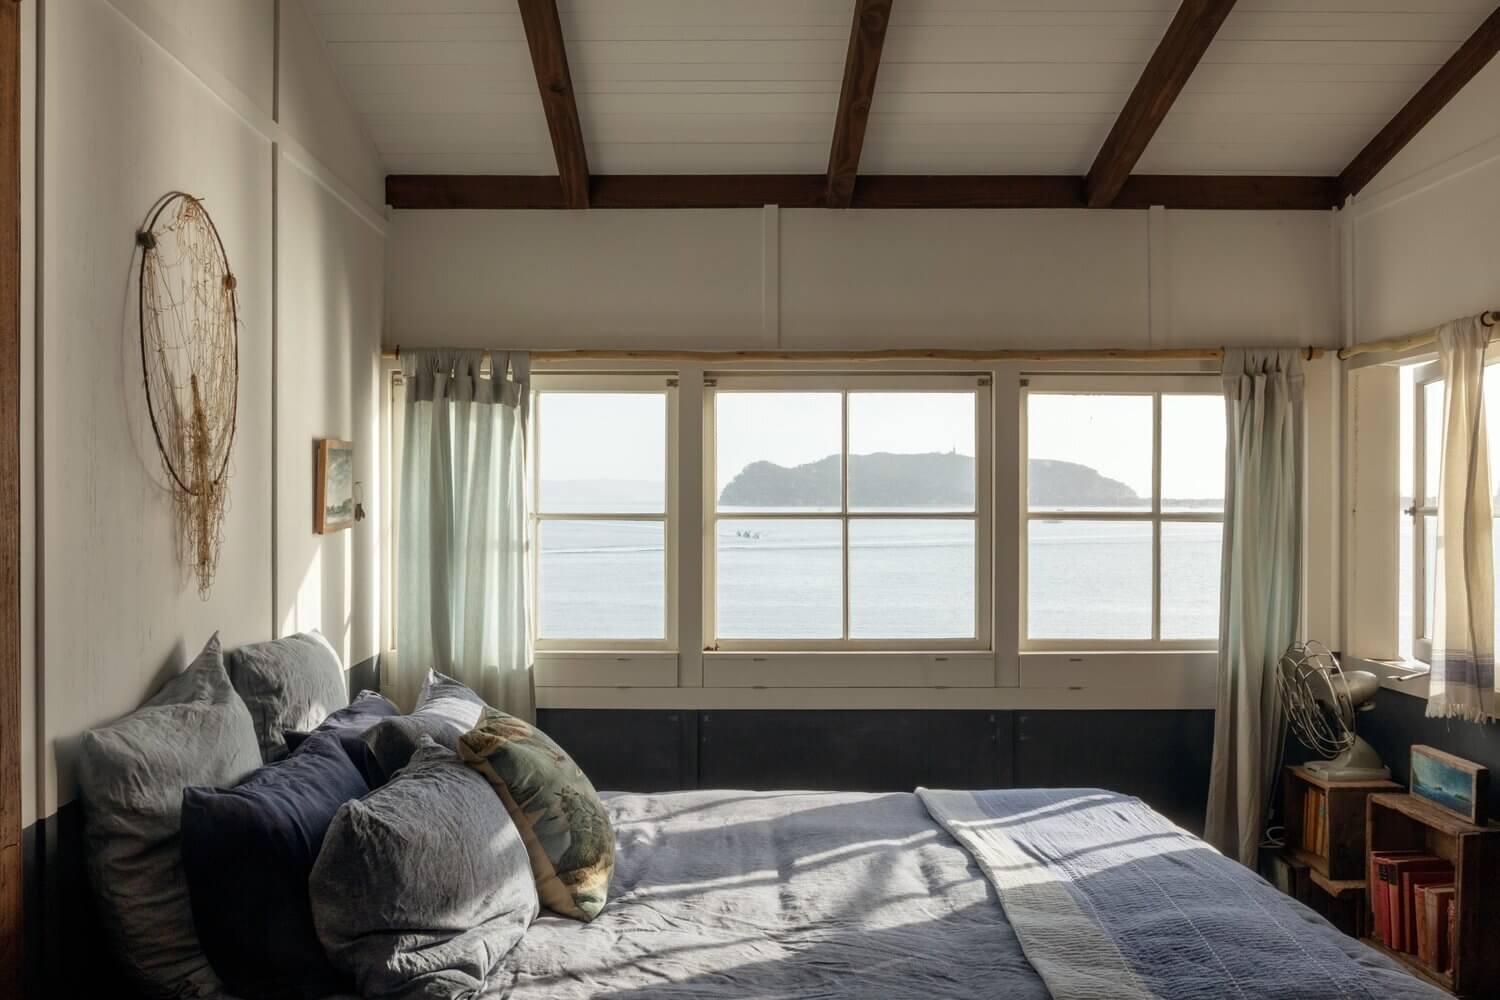 Bestof2019 SmallHomes TheNordroom7 Best of 2019: Small Homes